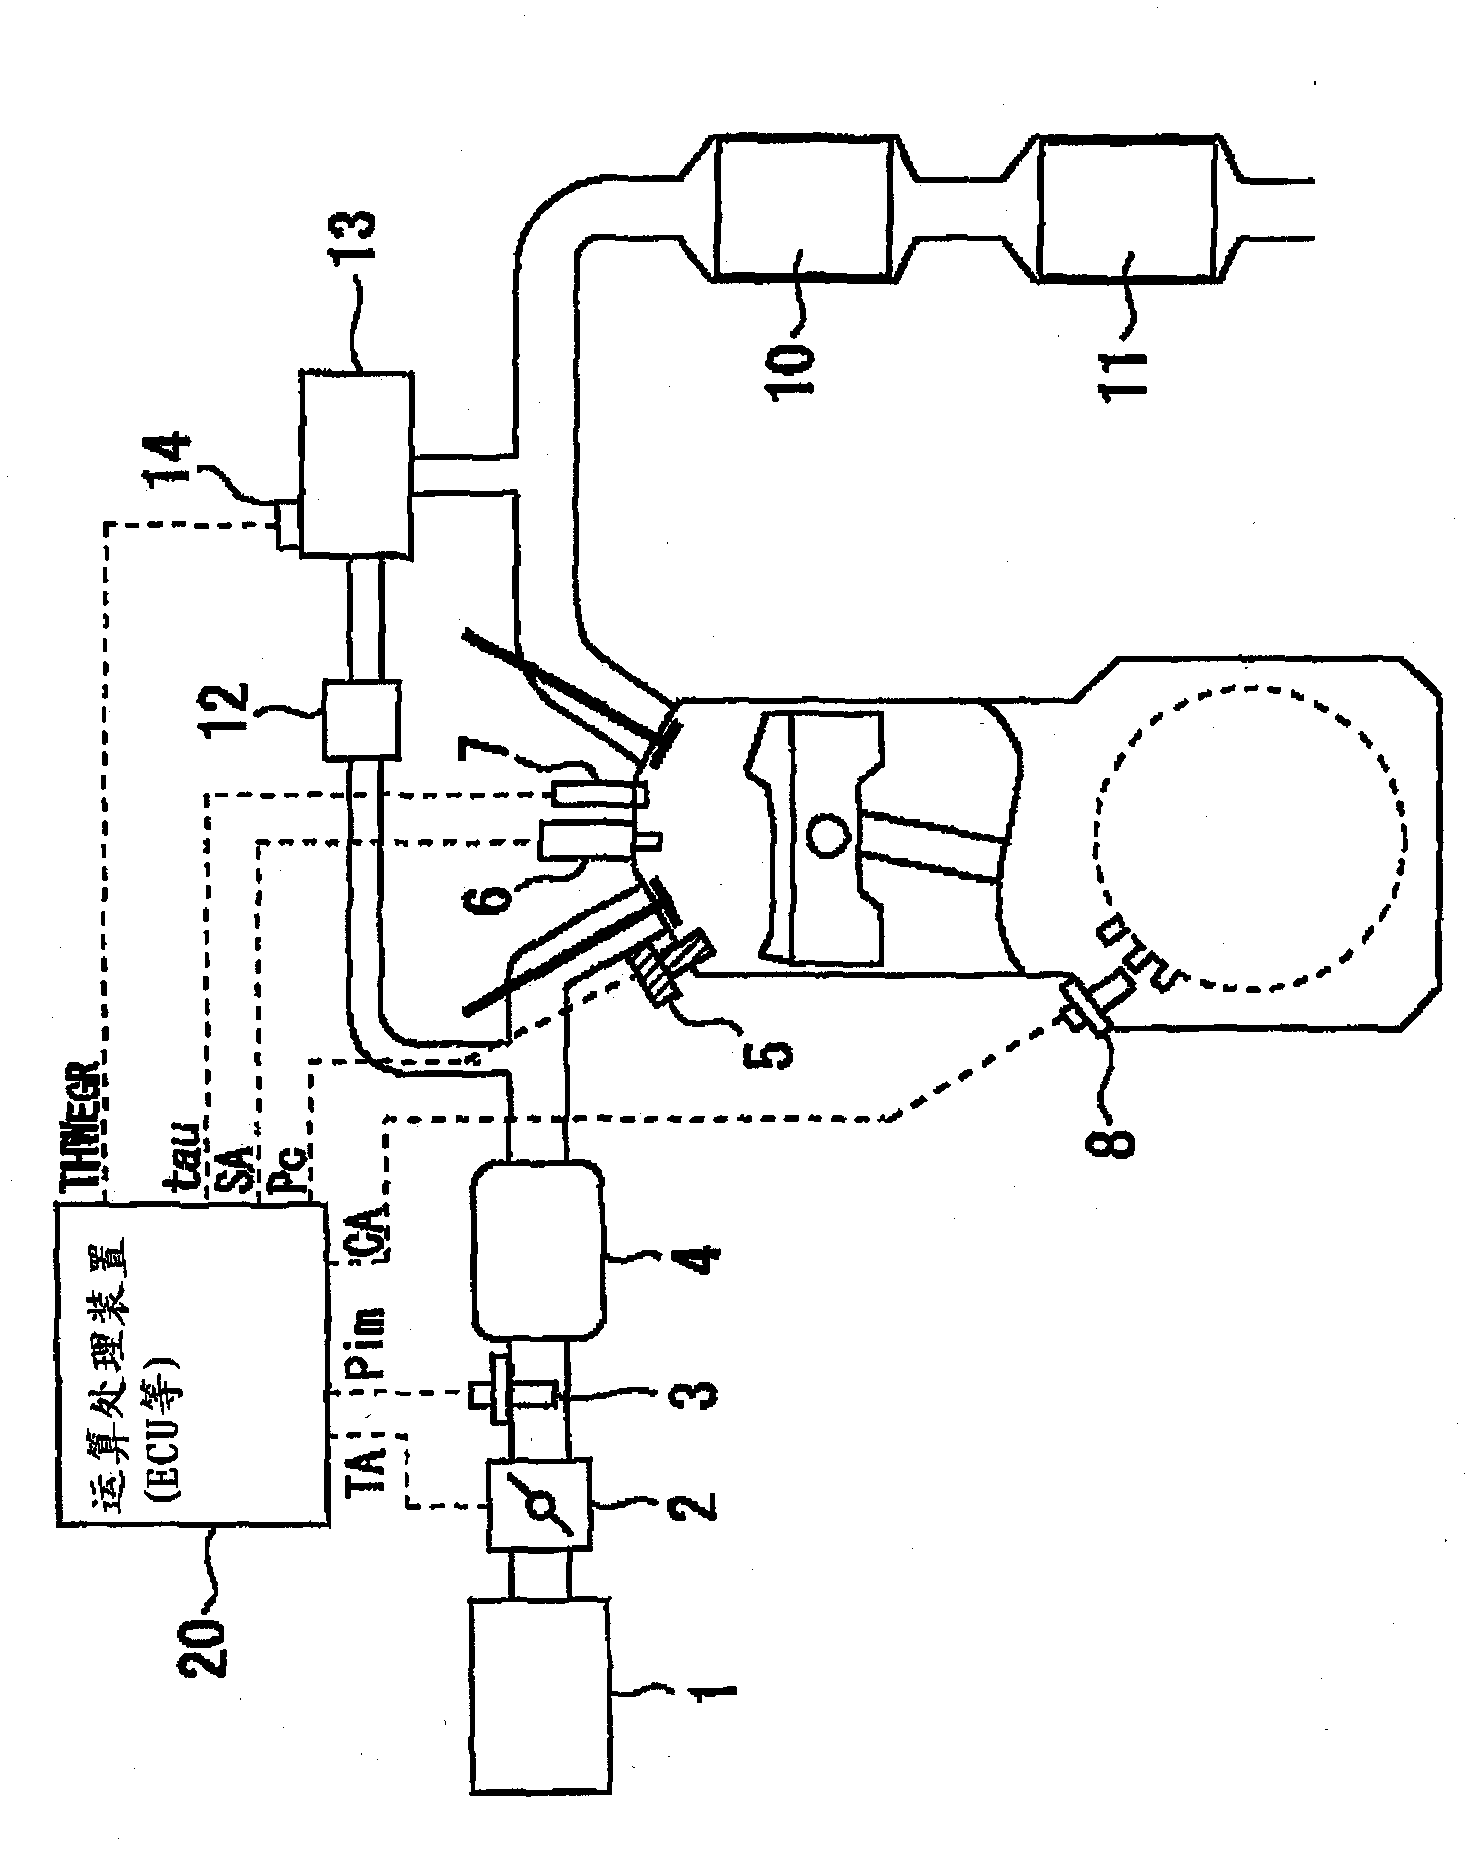 Control devices for internal combustion engines